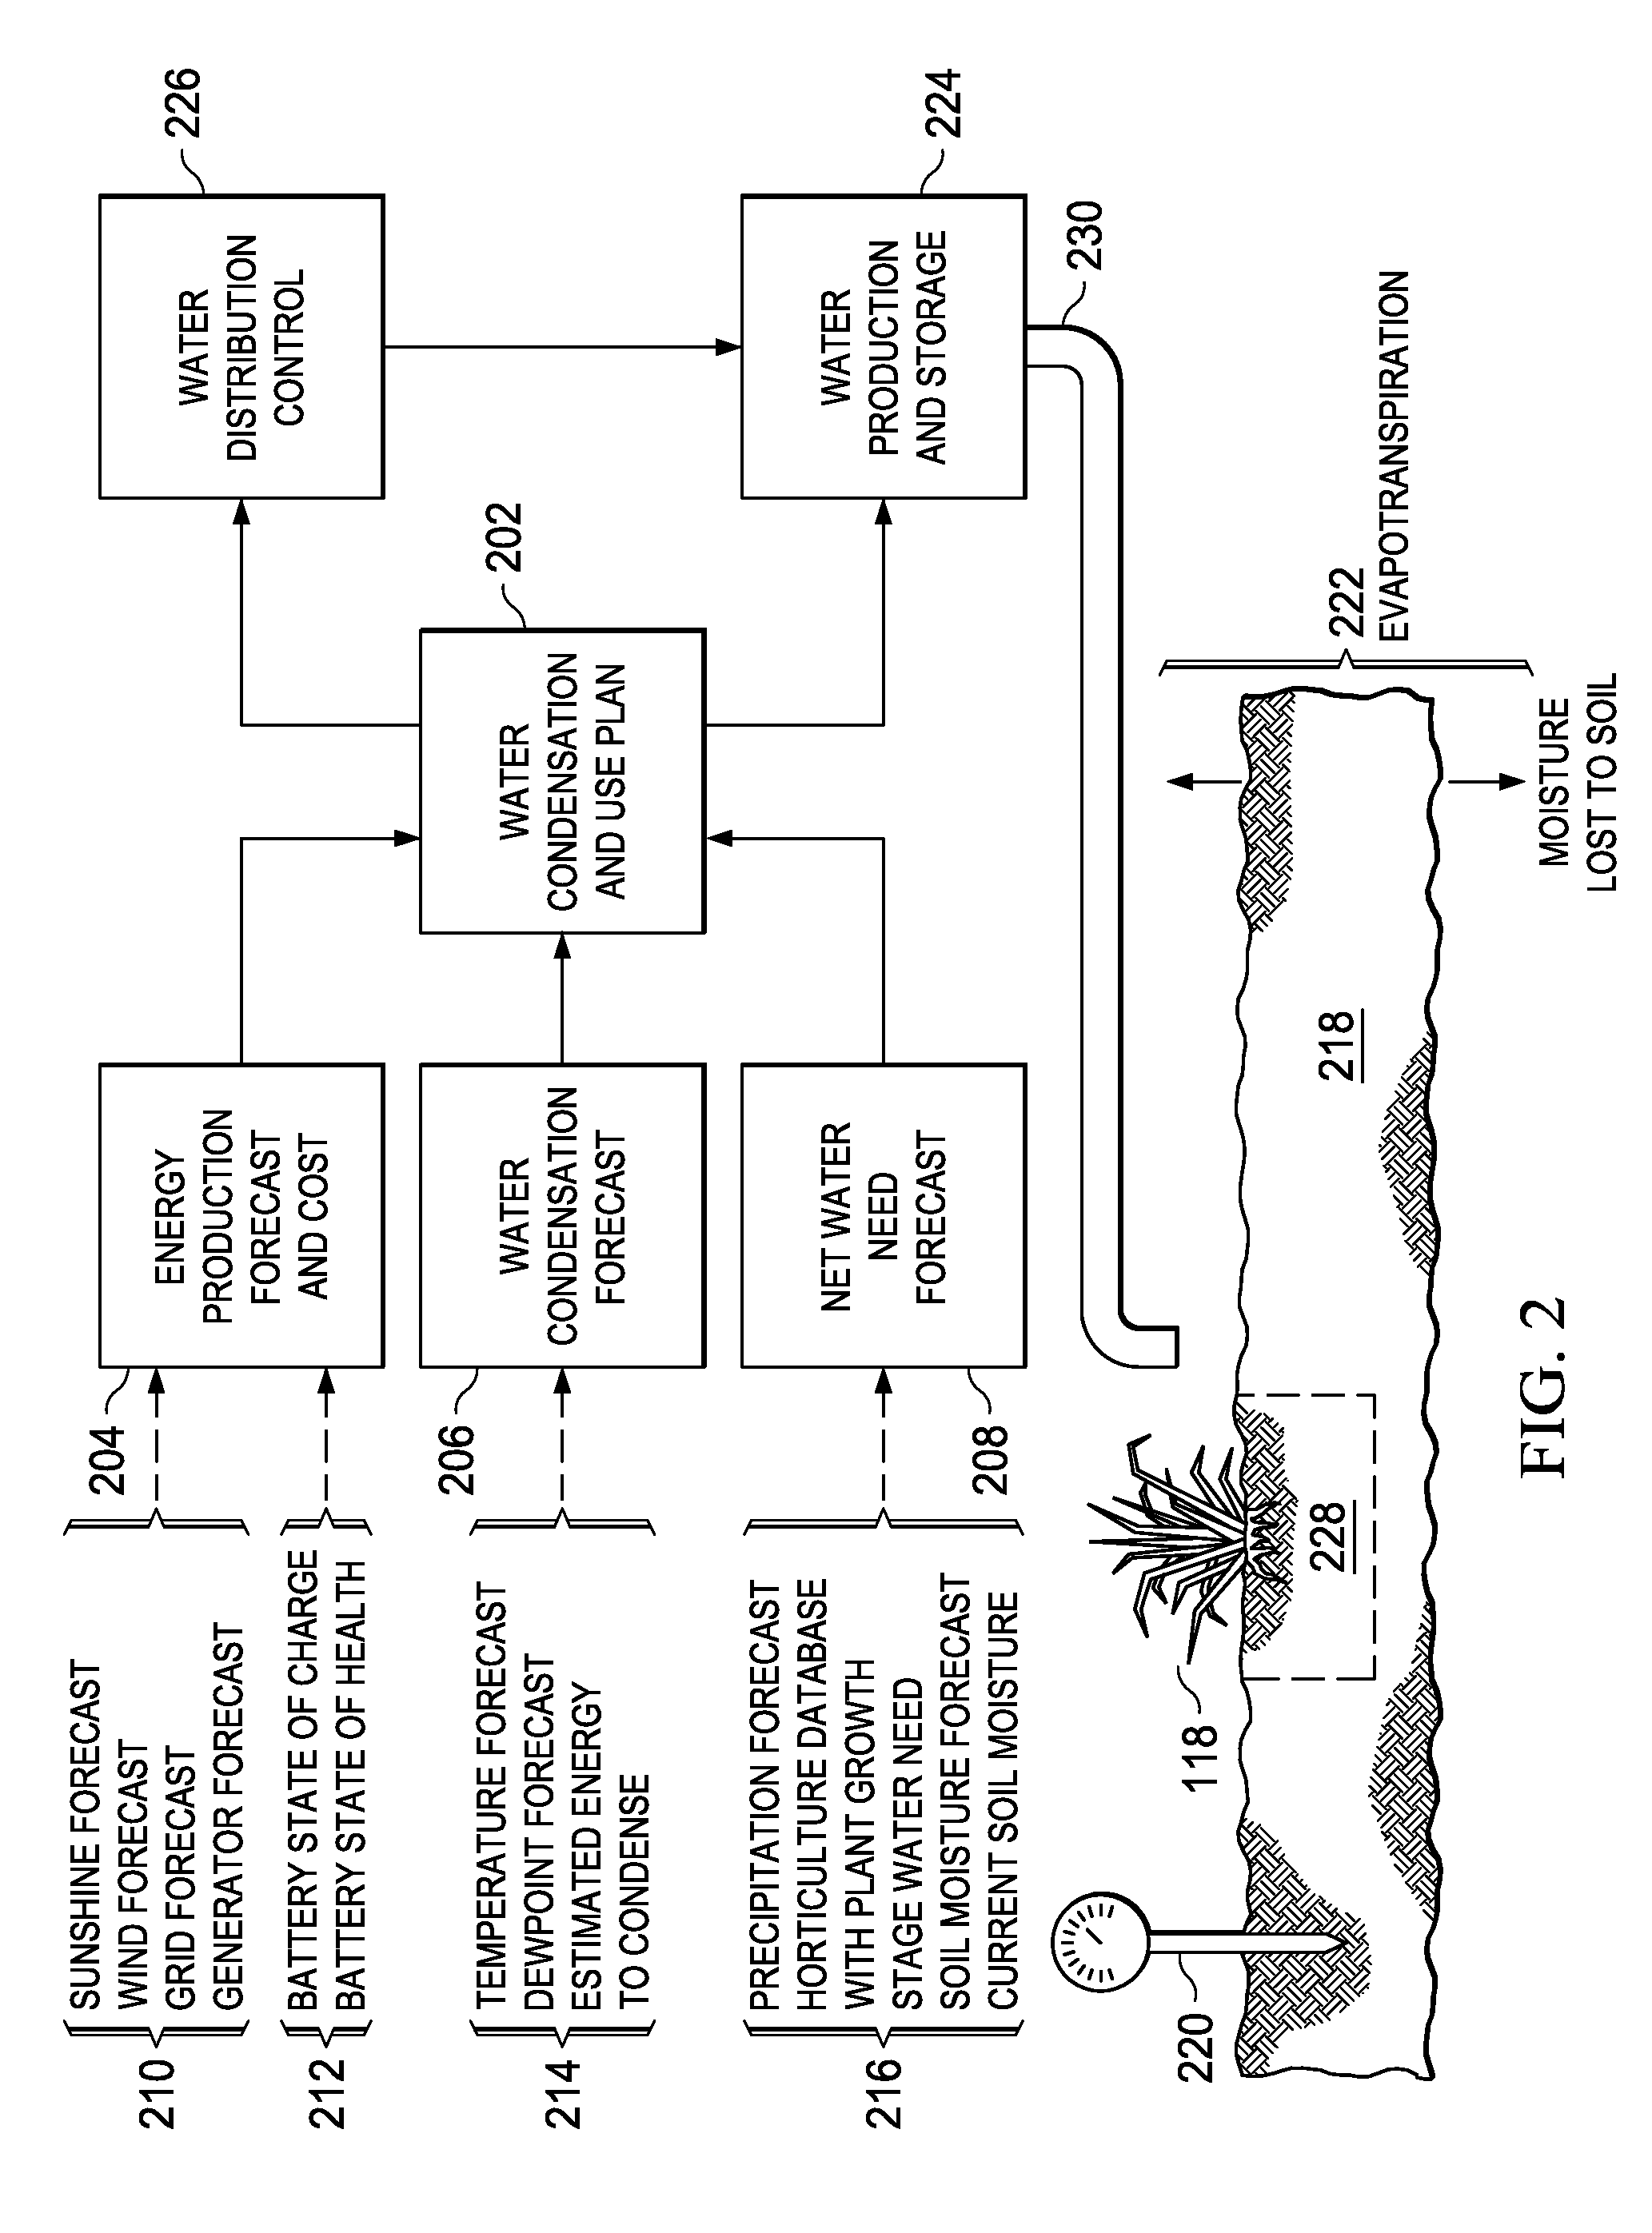 System and method for irrigation using atmospheric water